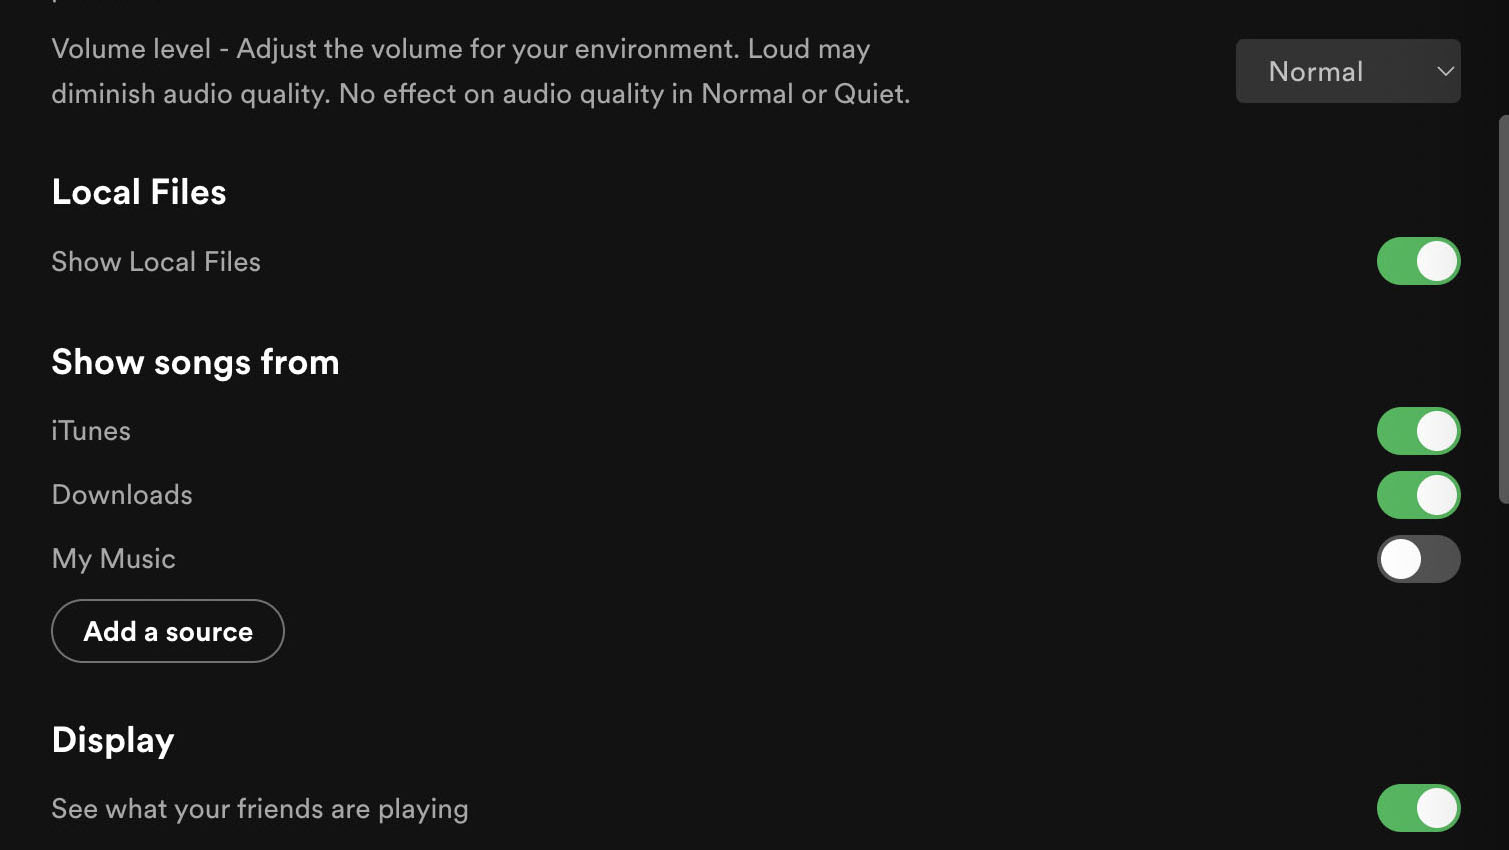 Spotify's local files feature